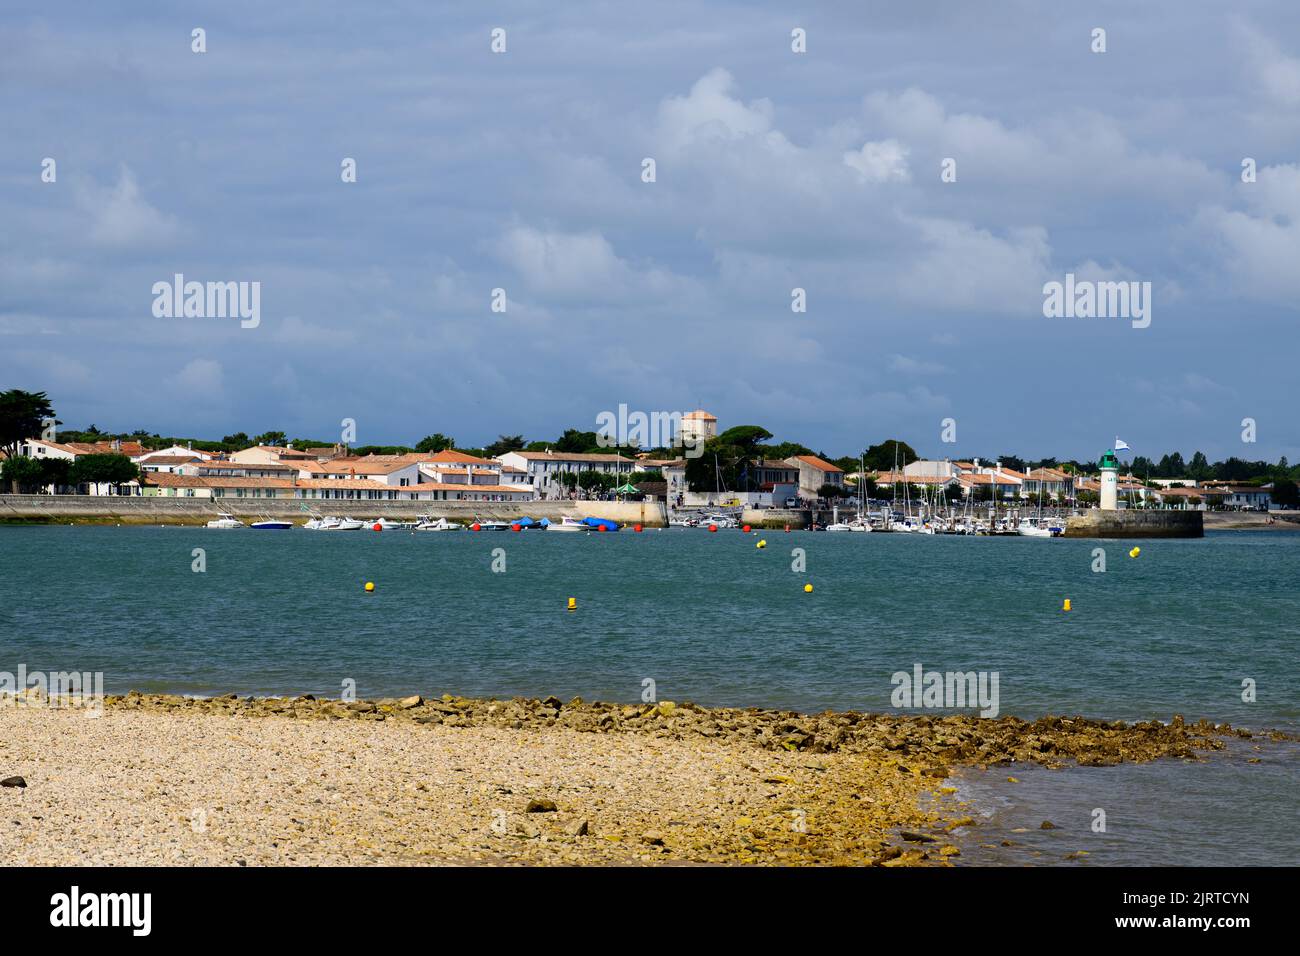 View on the Phare de la Flotte and some boats on the sea from the beach plage de l' Arnérault on a sunny summerday with the city in the background Stock Photo